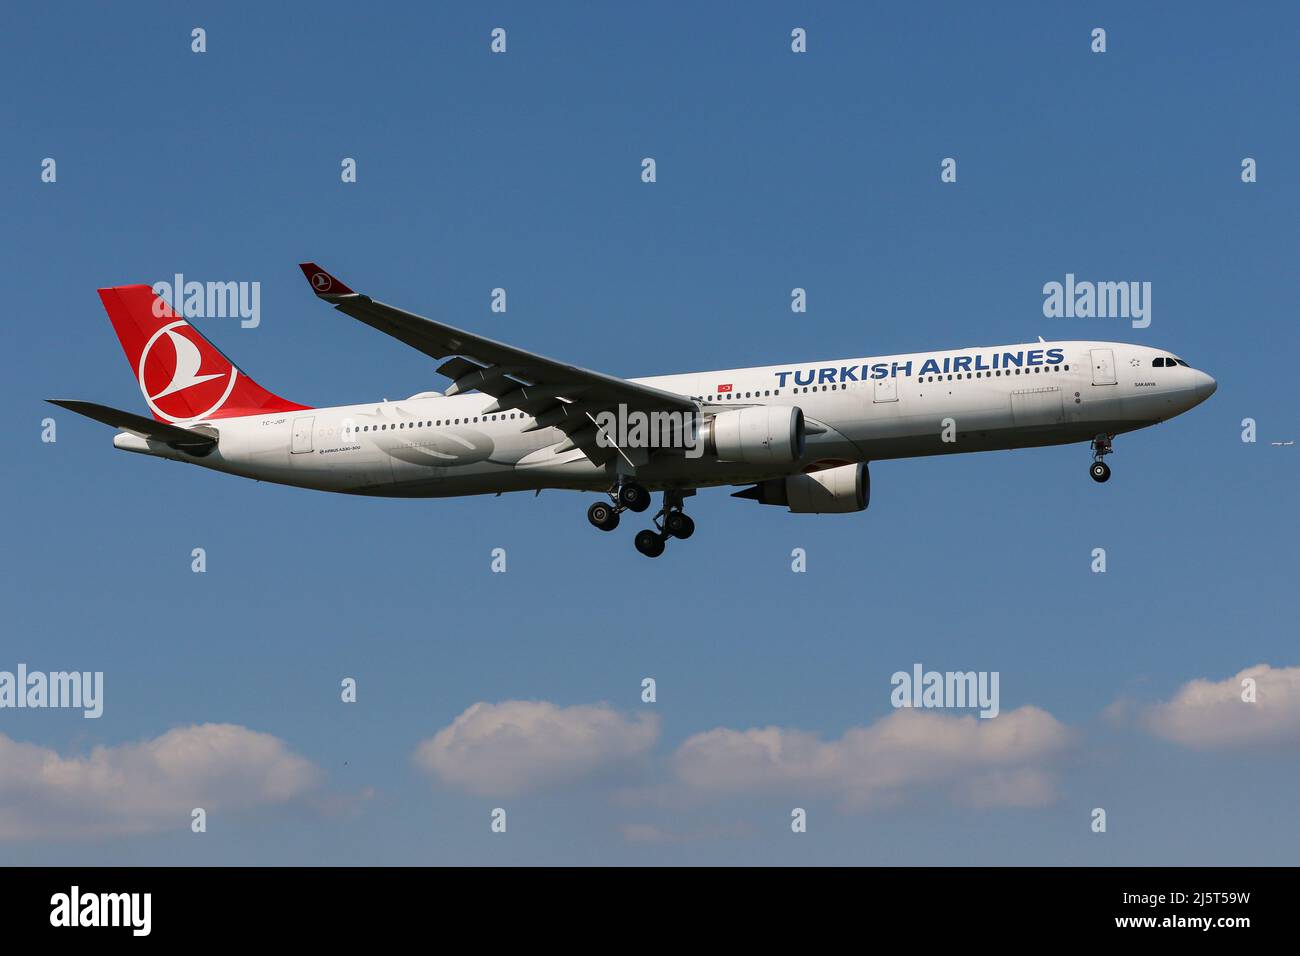 An Airbus A330 operated by Turkish Airlines arrives at London Heathrow Airport Stock Photo